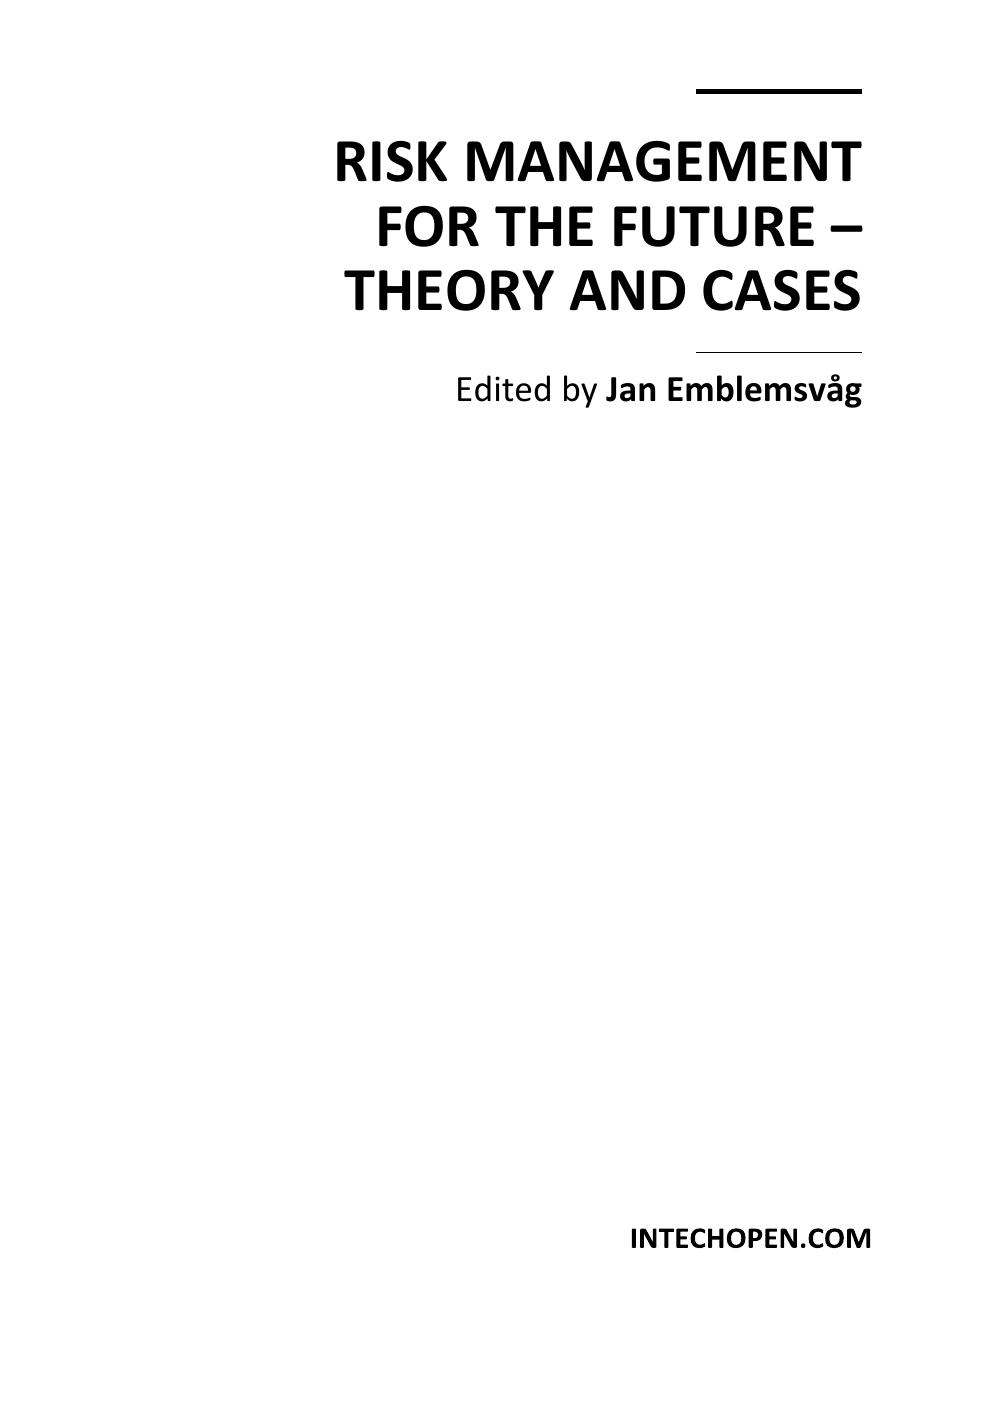 Risk Management for the Future Theory and Cases 2012.pdf